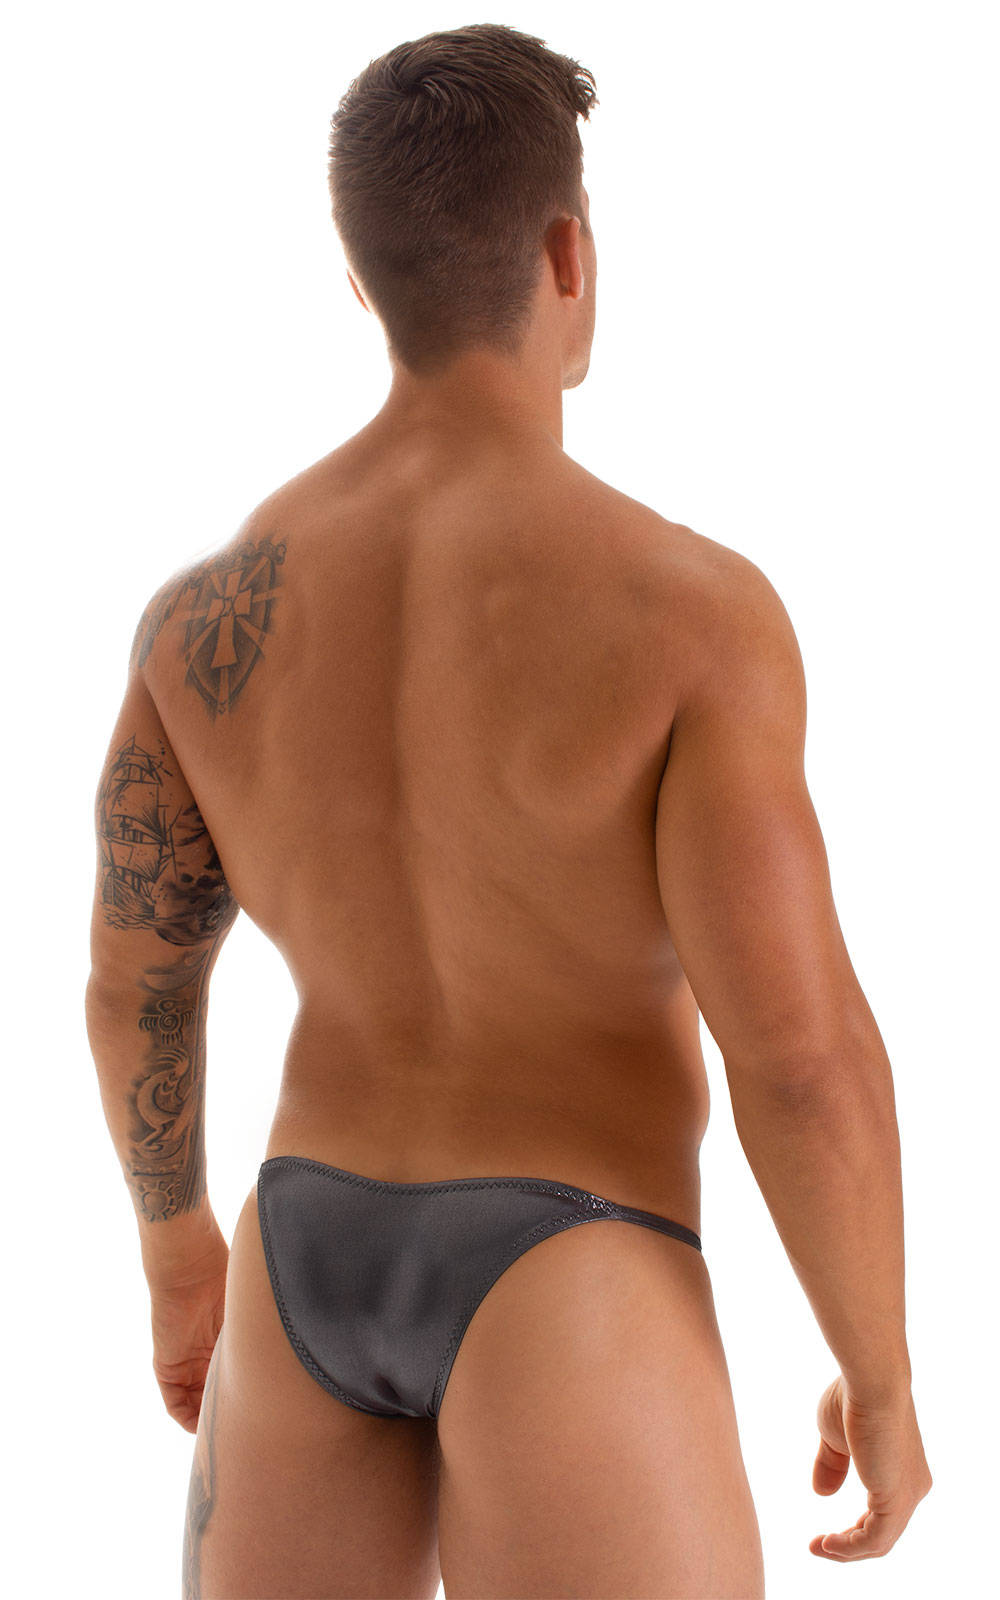 Stuffit Pouch Half Back Tanning Swimsuit in Black Ice.